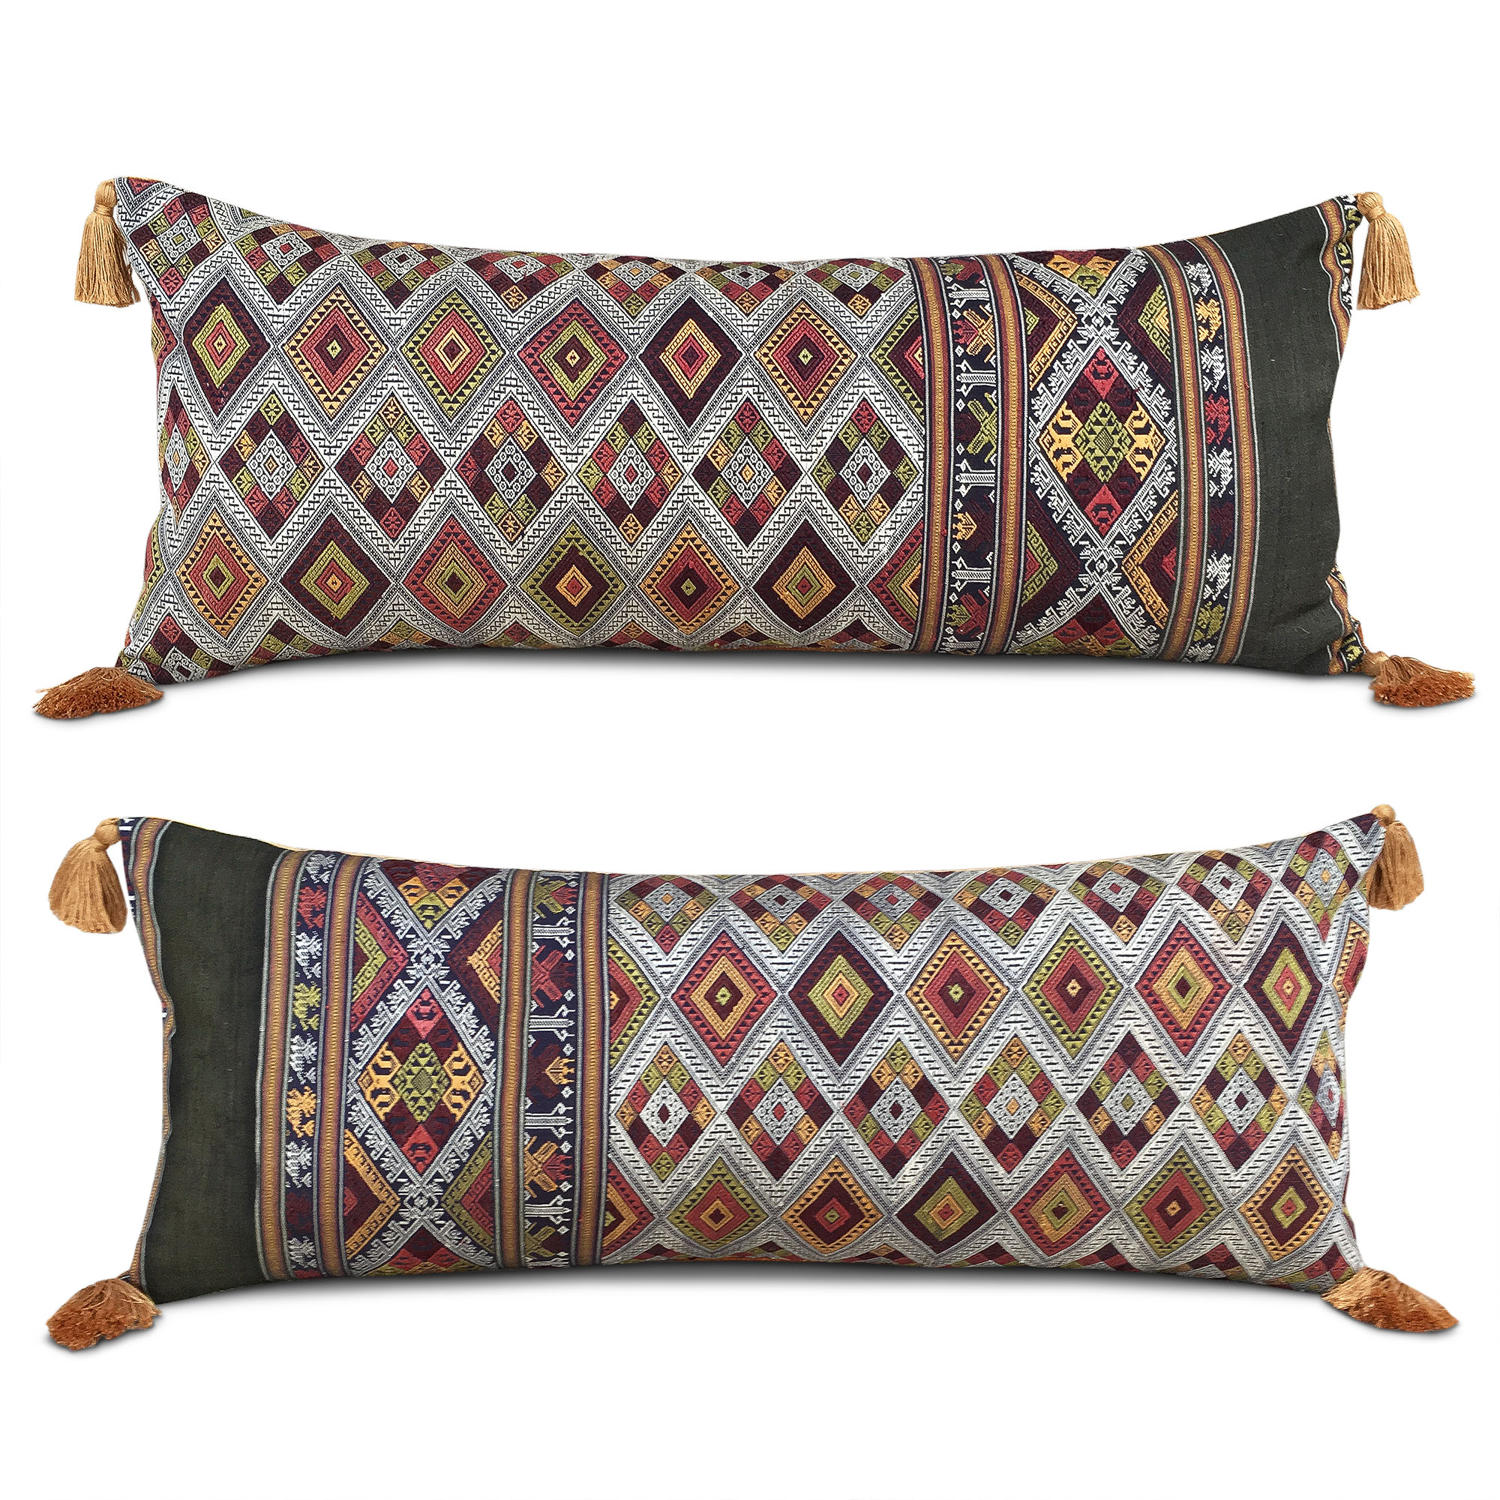 Large Laotian Cushions with Tassels